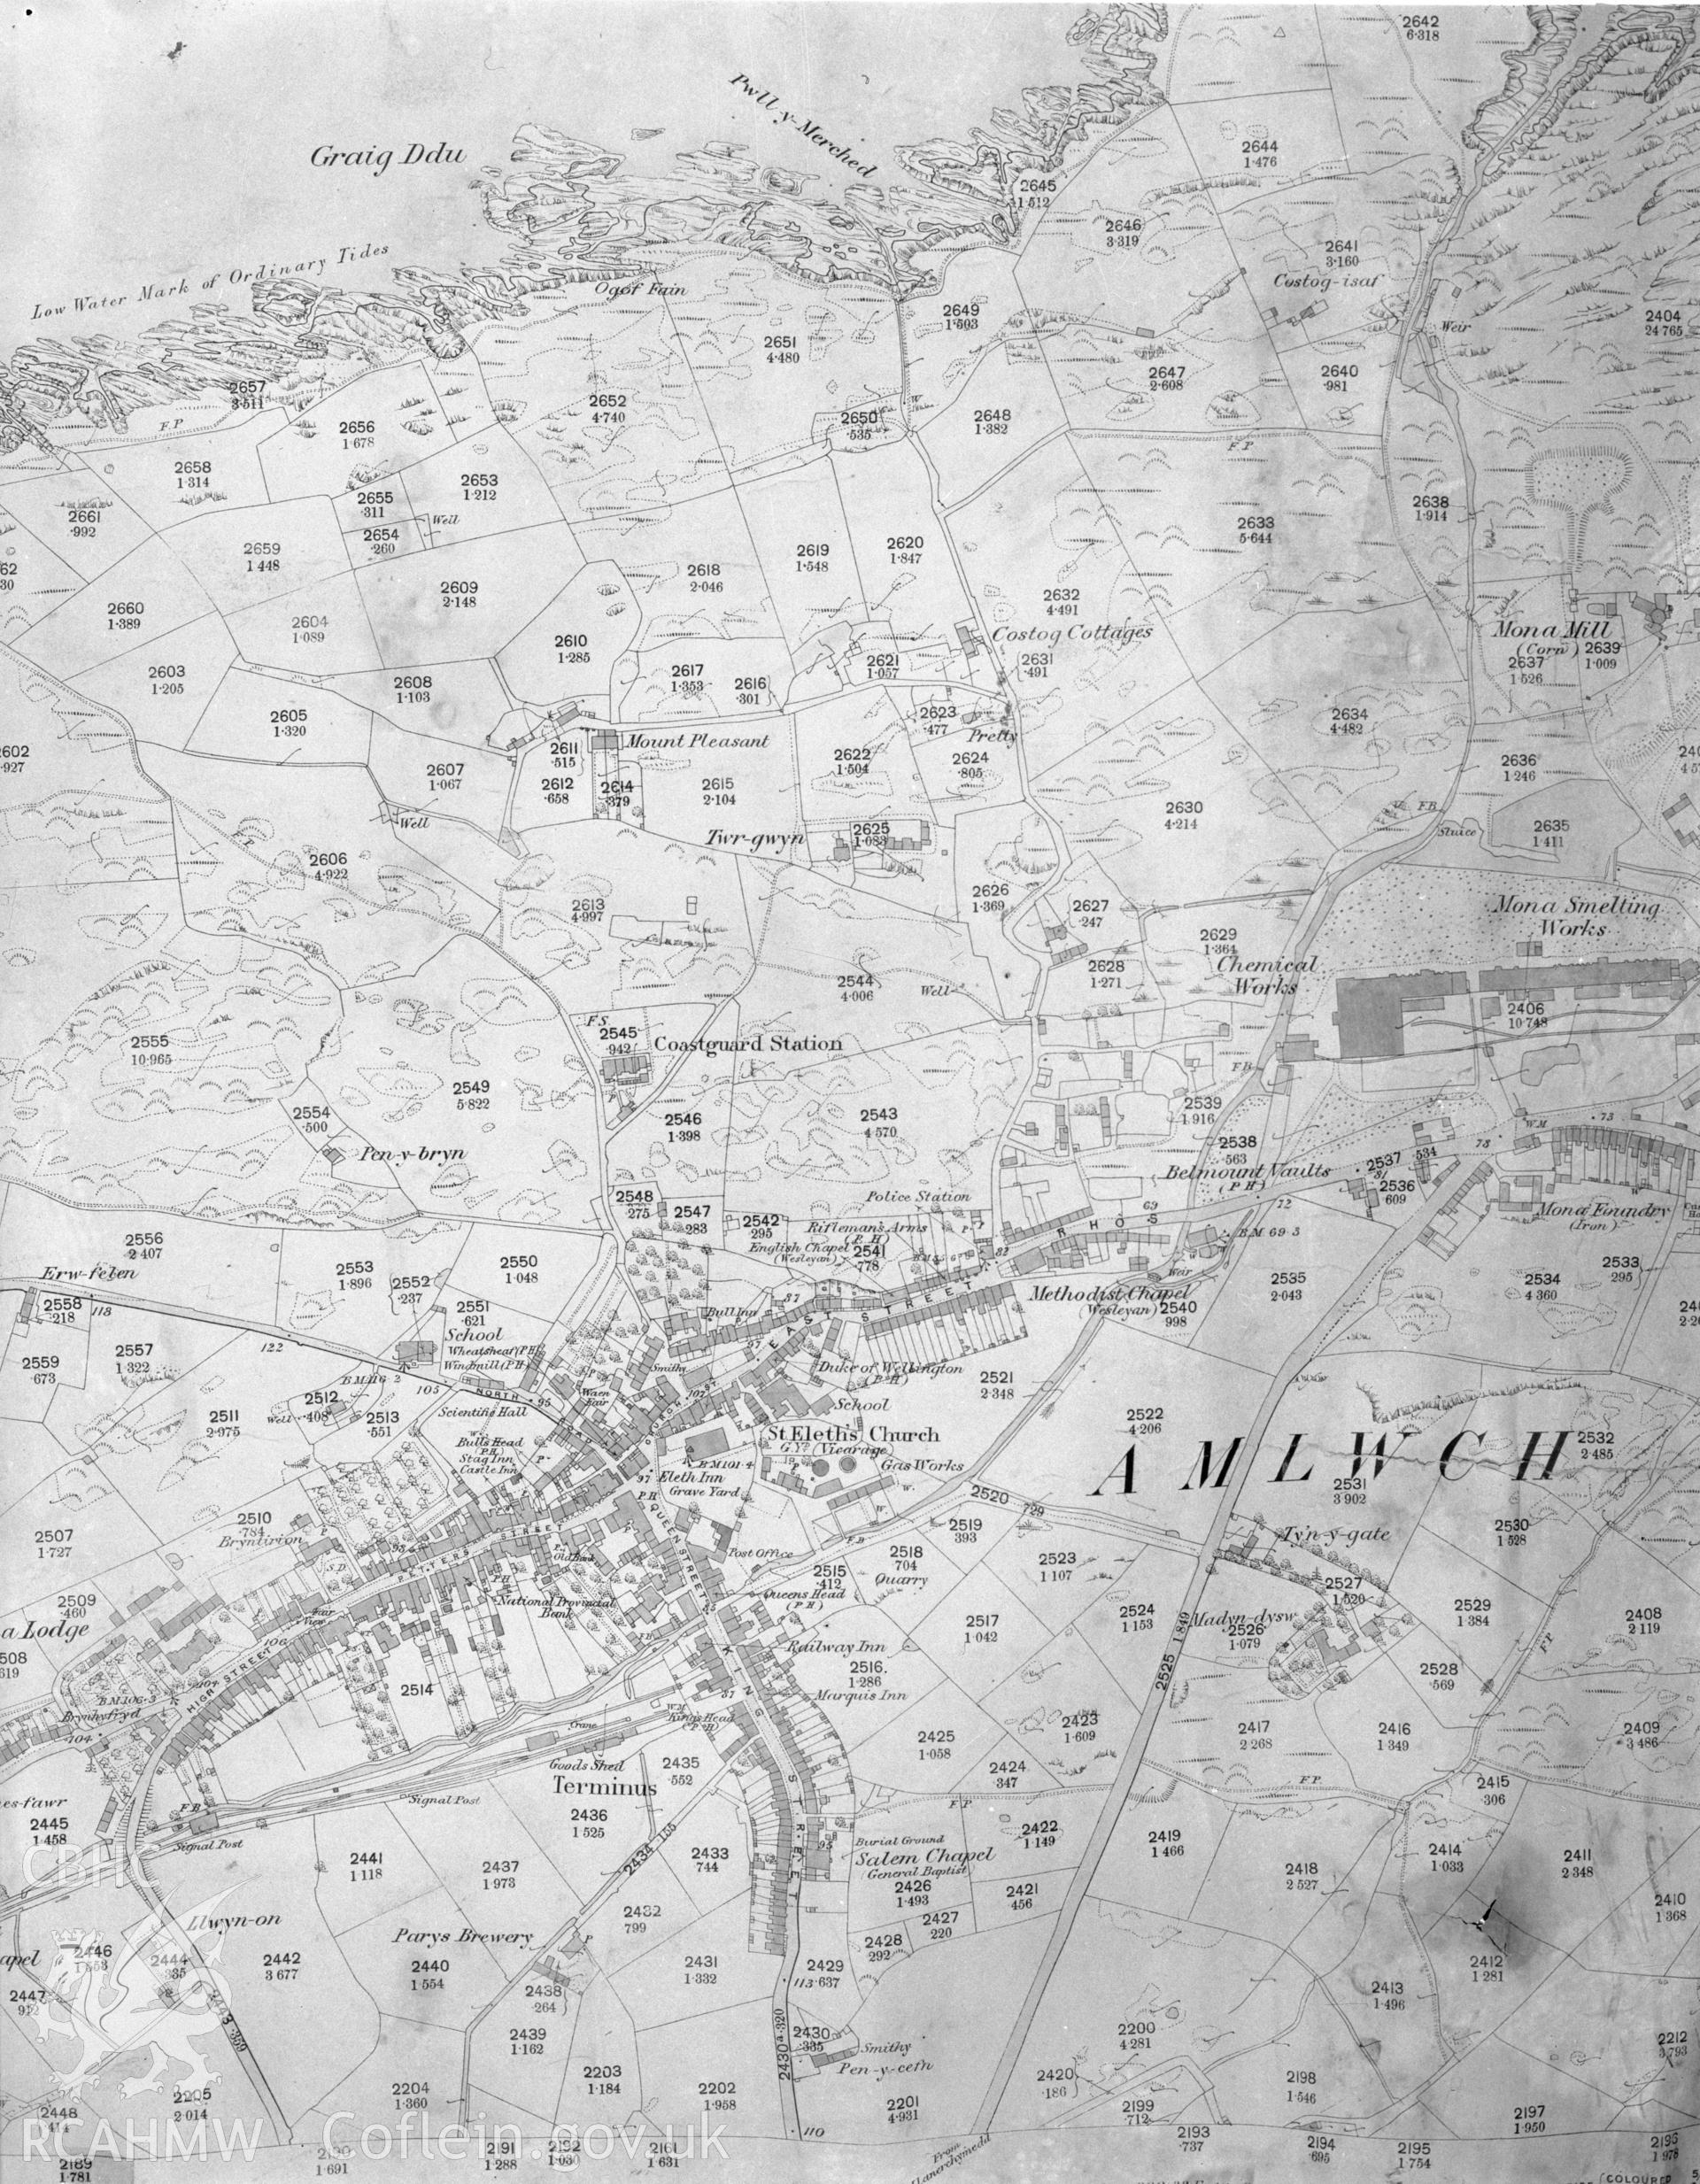 Black and white acetate negative showing early maps of the area around Amlwch.